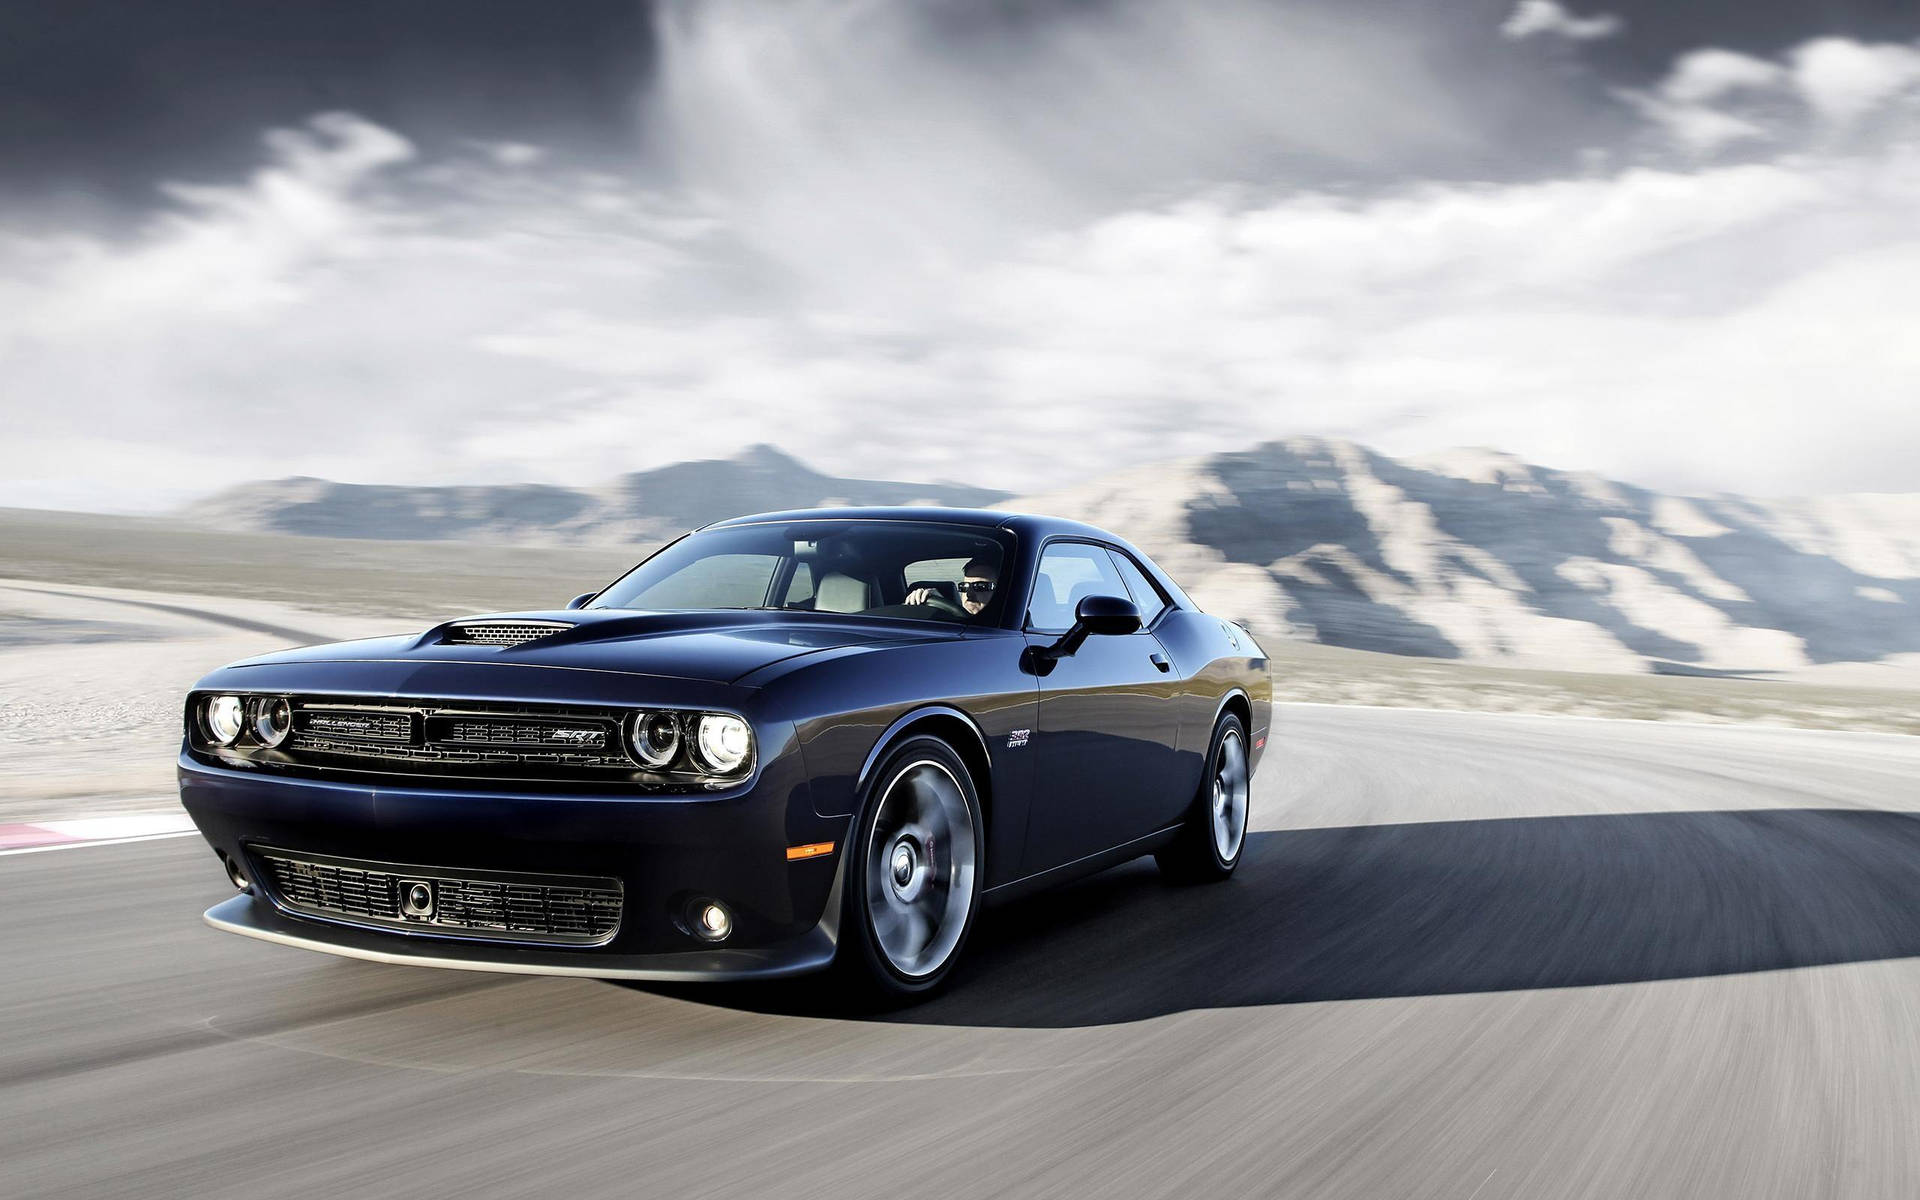 Thrilling Ride with Dodge Challenger Wallpaper